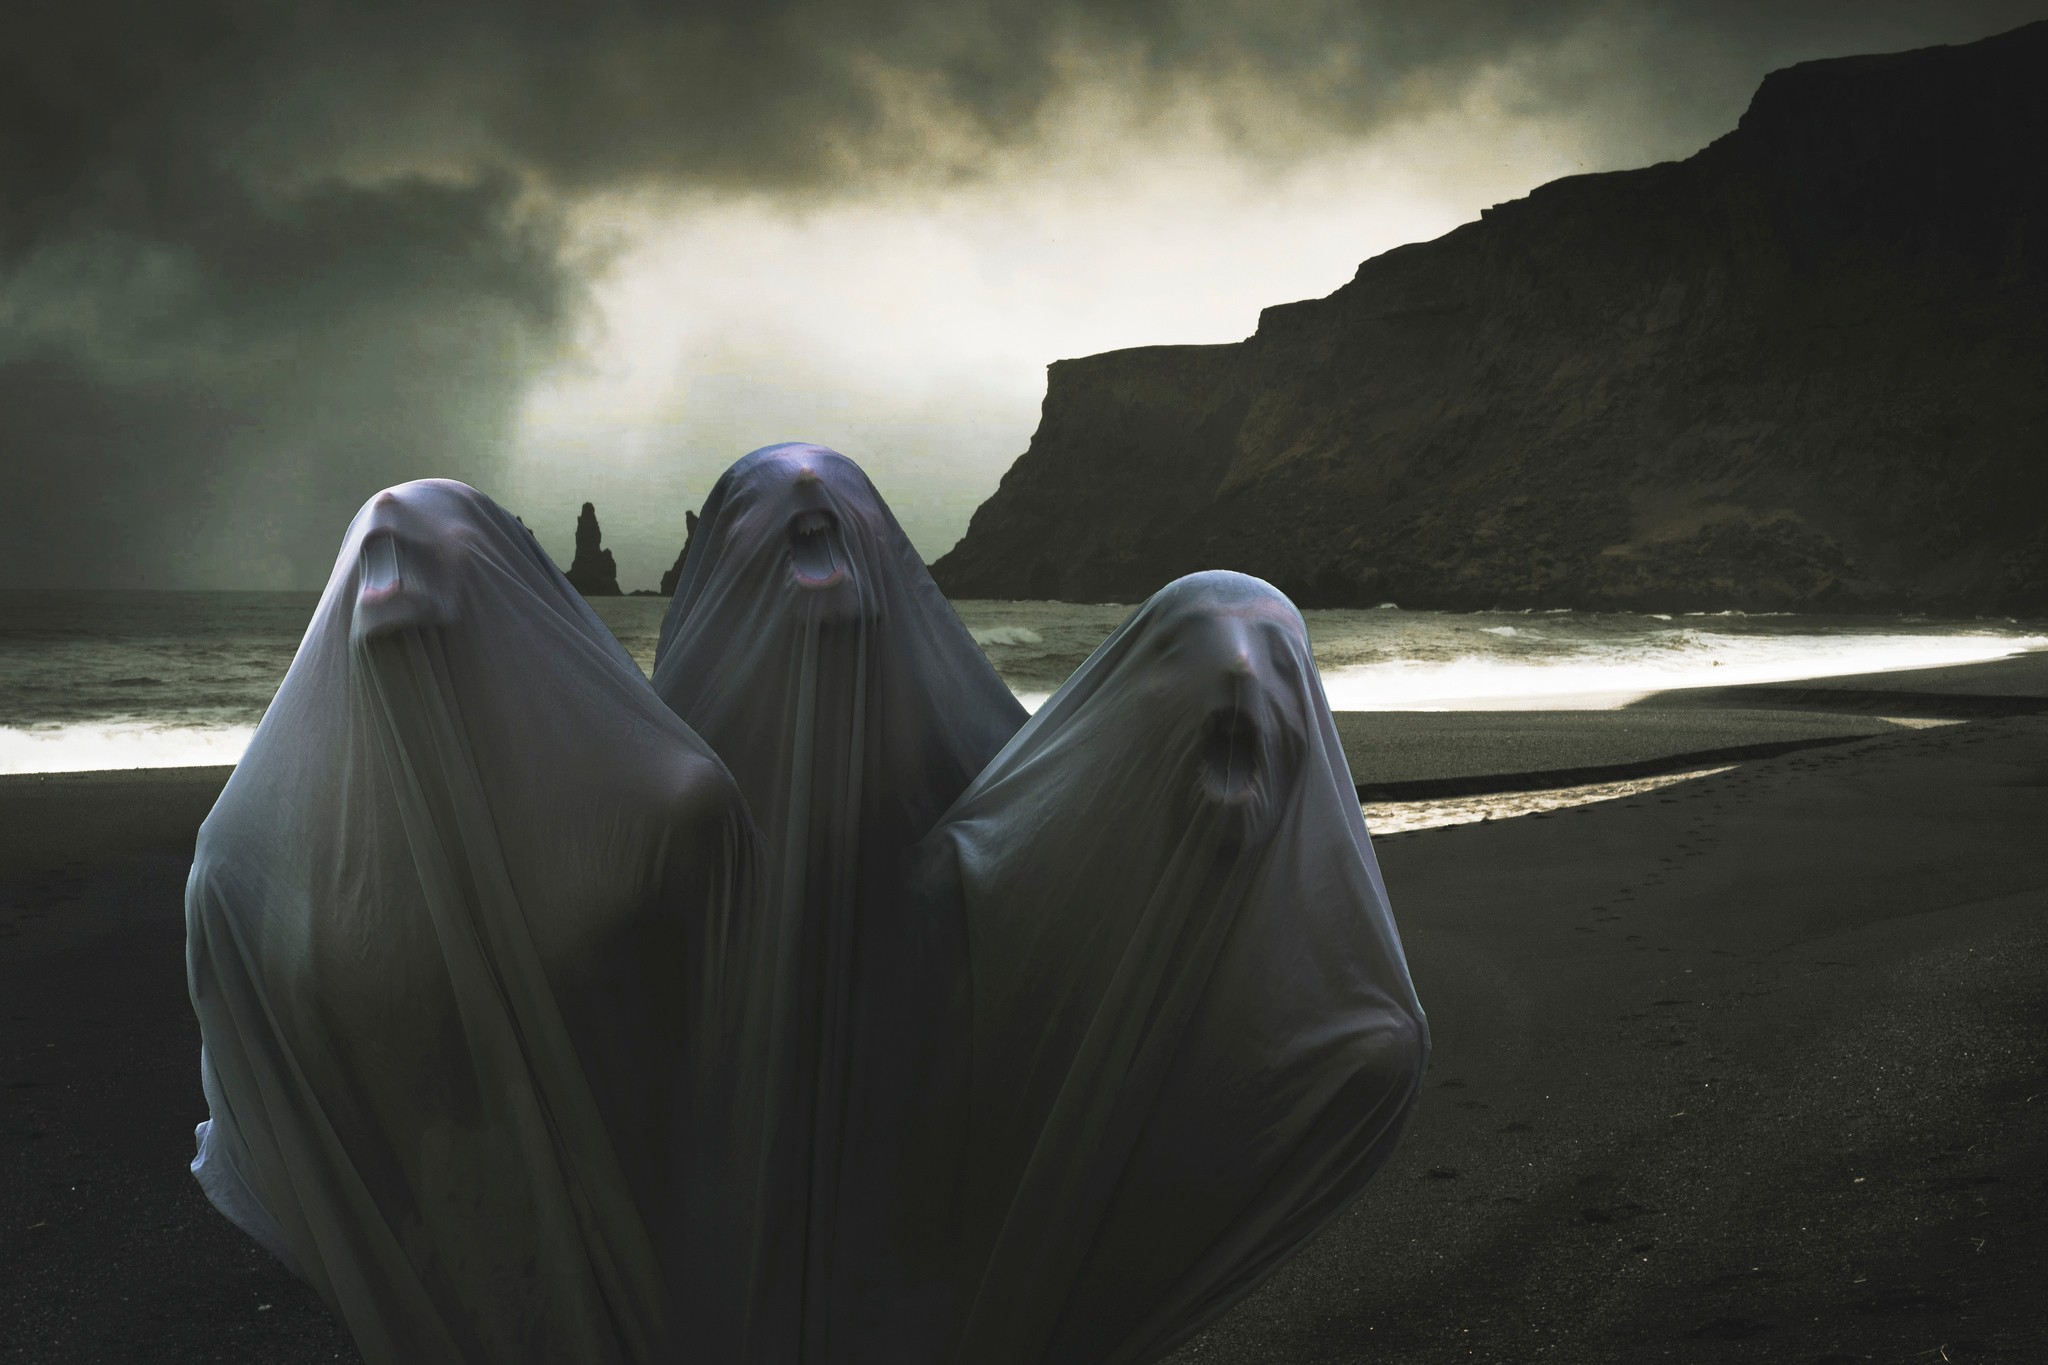 General 2048x1365 artwork surreal landscape sea creepy ghost death beach see-through clothing screaming open mouth black sand overcast men